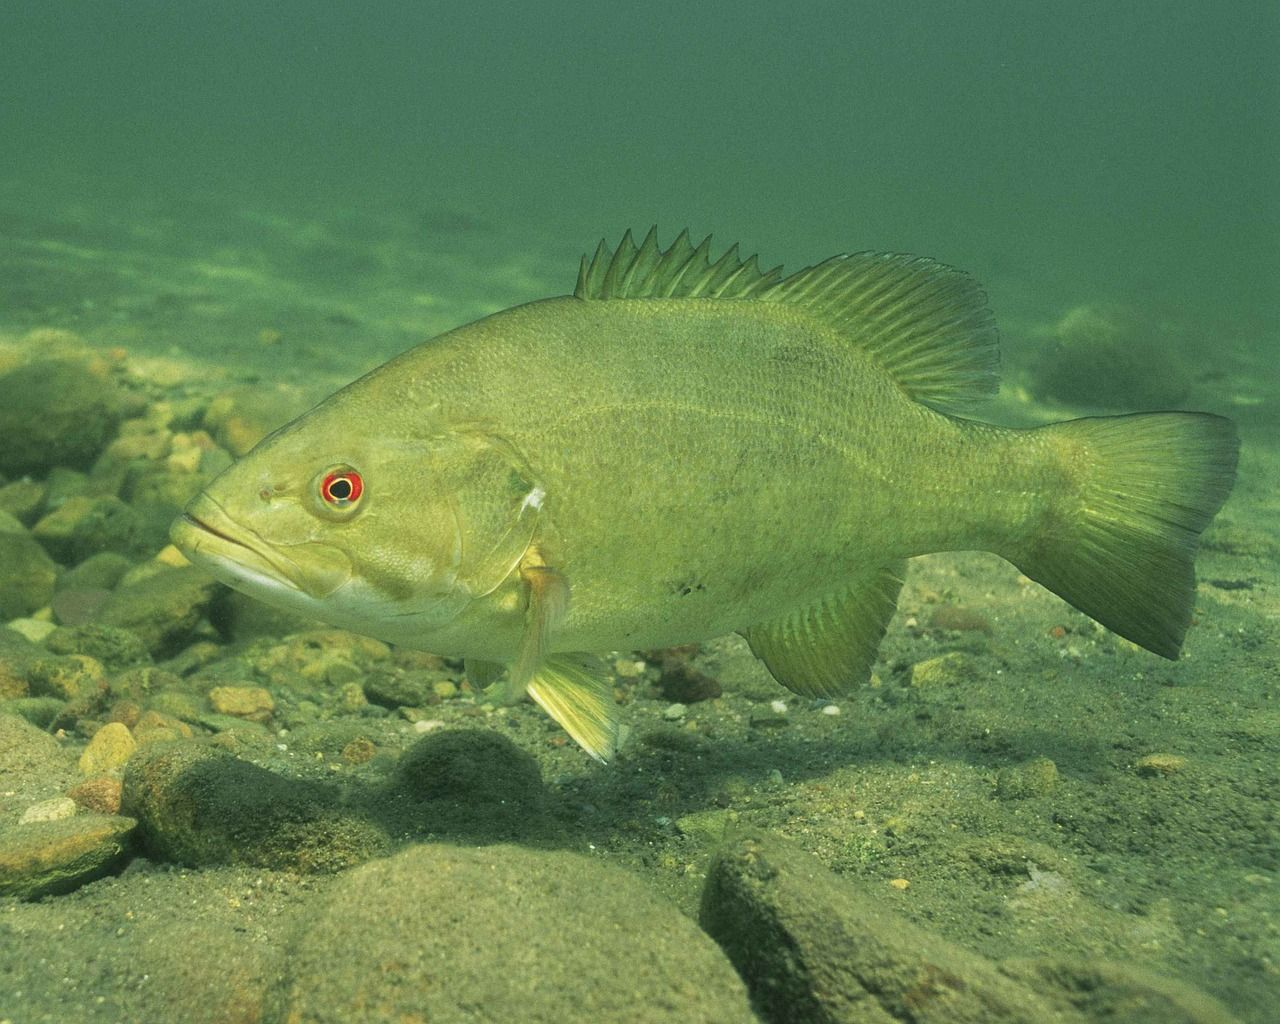 The Year of the Smallmouth Bass by Pat Kirmse. Friends of the Fox River